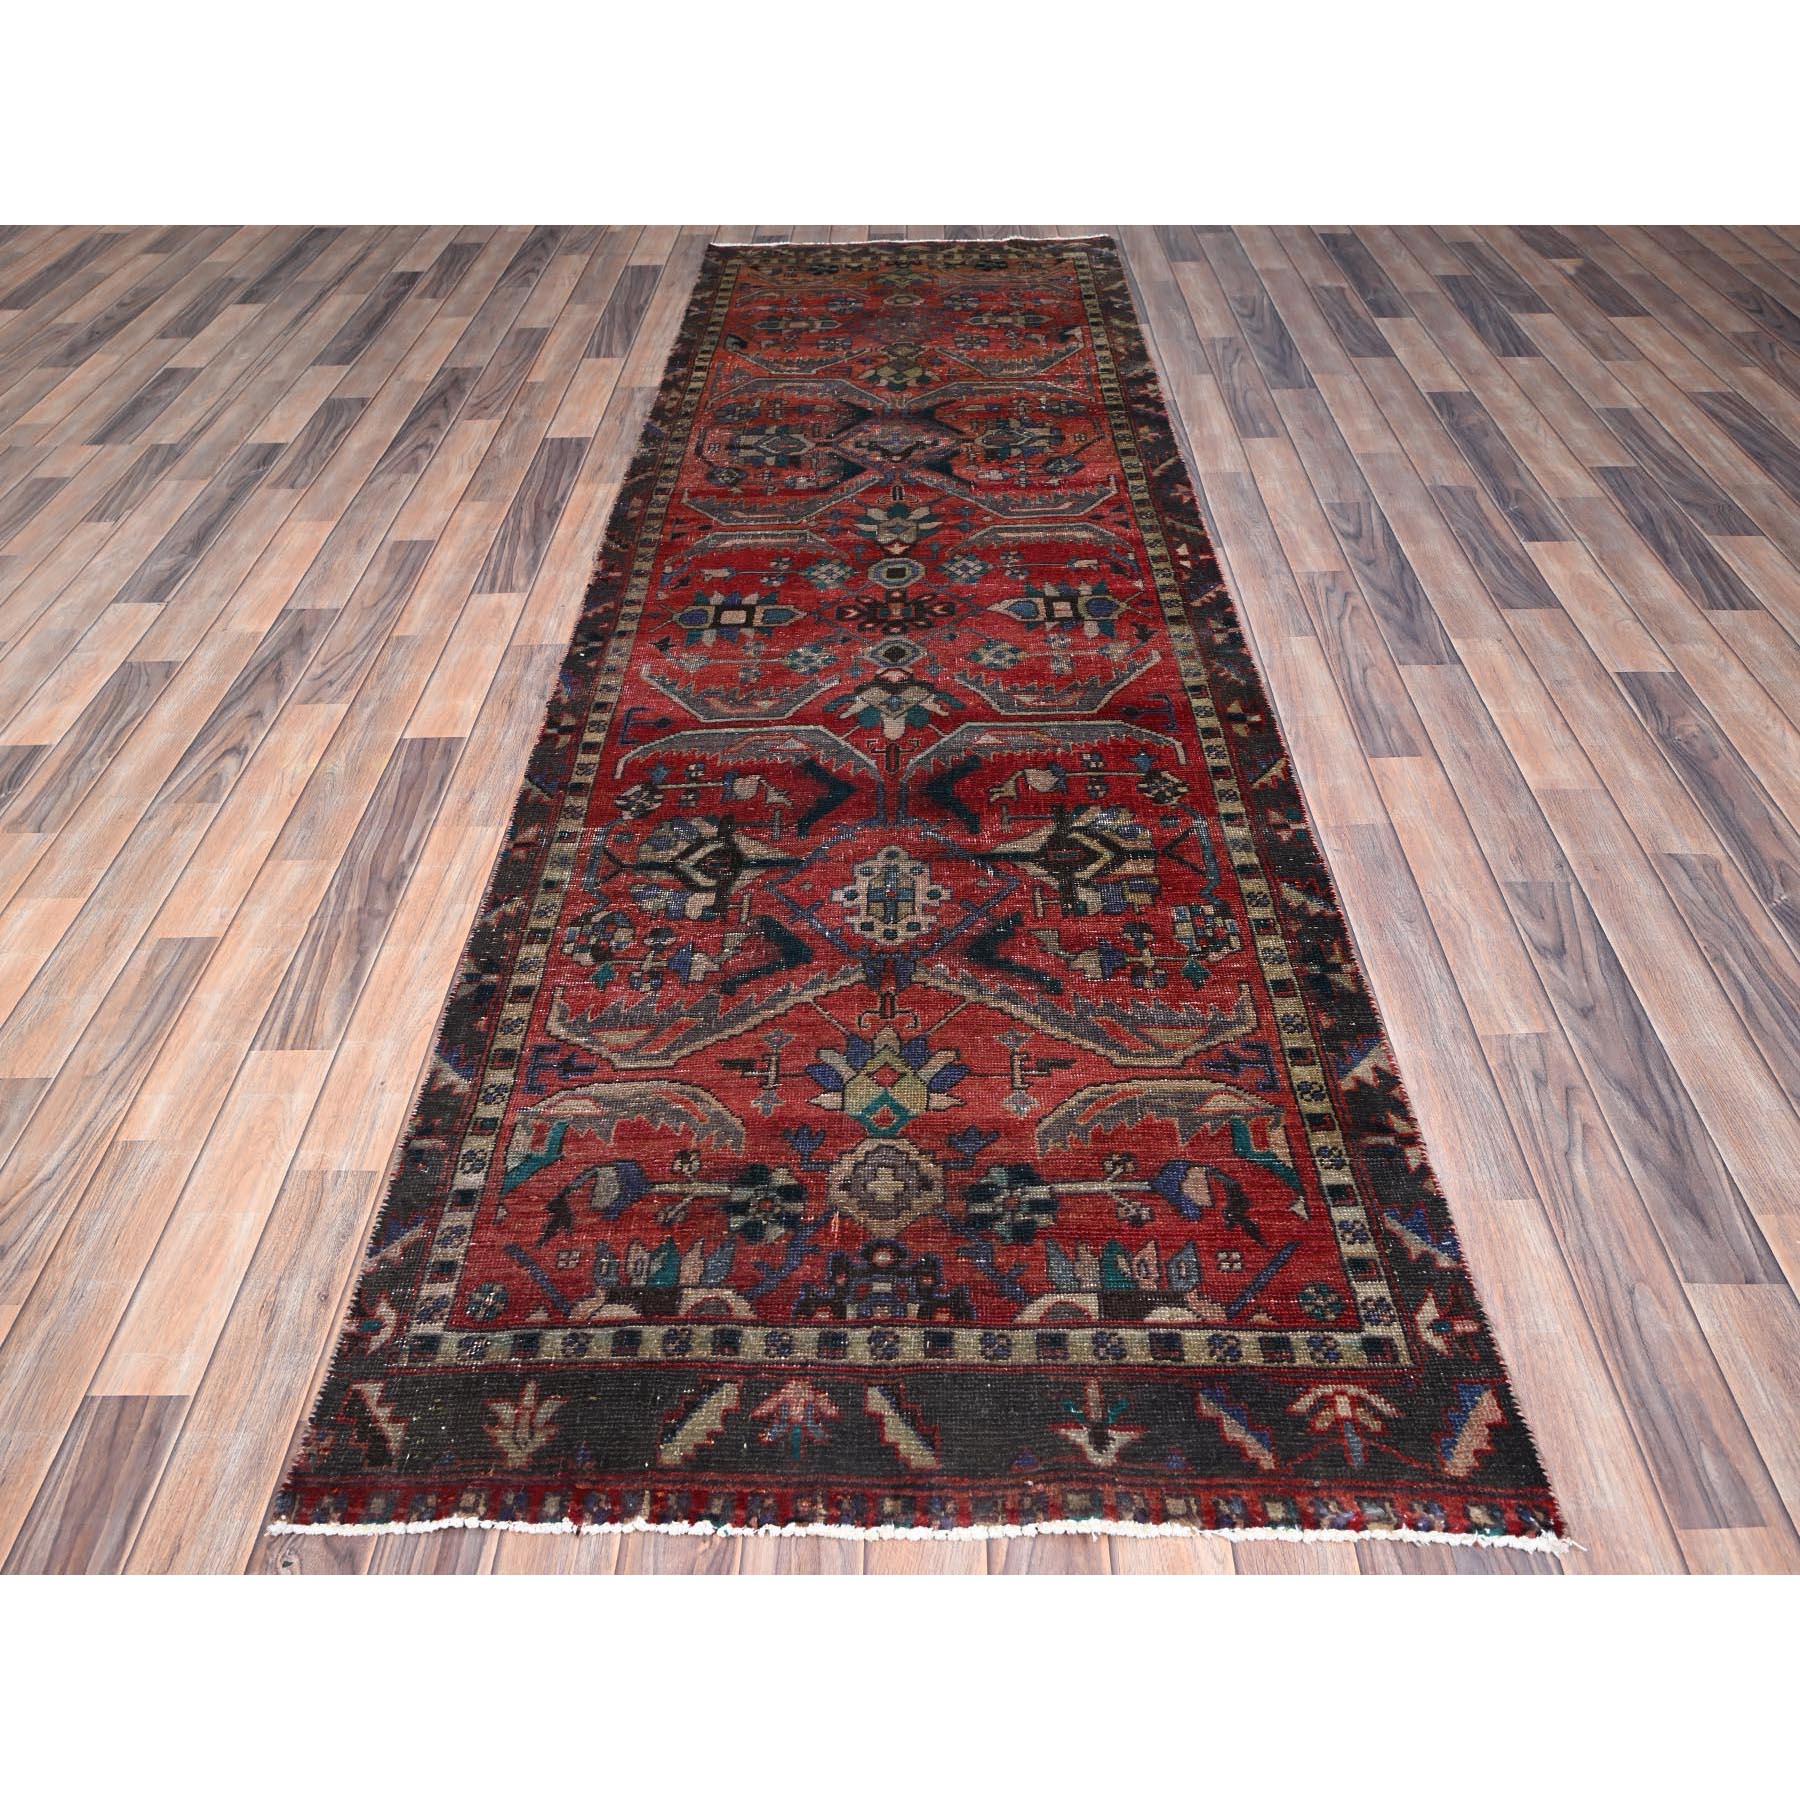 This fabulous Hand-Knotted carpet has been created and designed for extra strength and durability. This rug has been handcrafted for weeks in the traditional method that is used to make
Exact Rug Size in Feet and Inches : 3'4